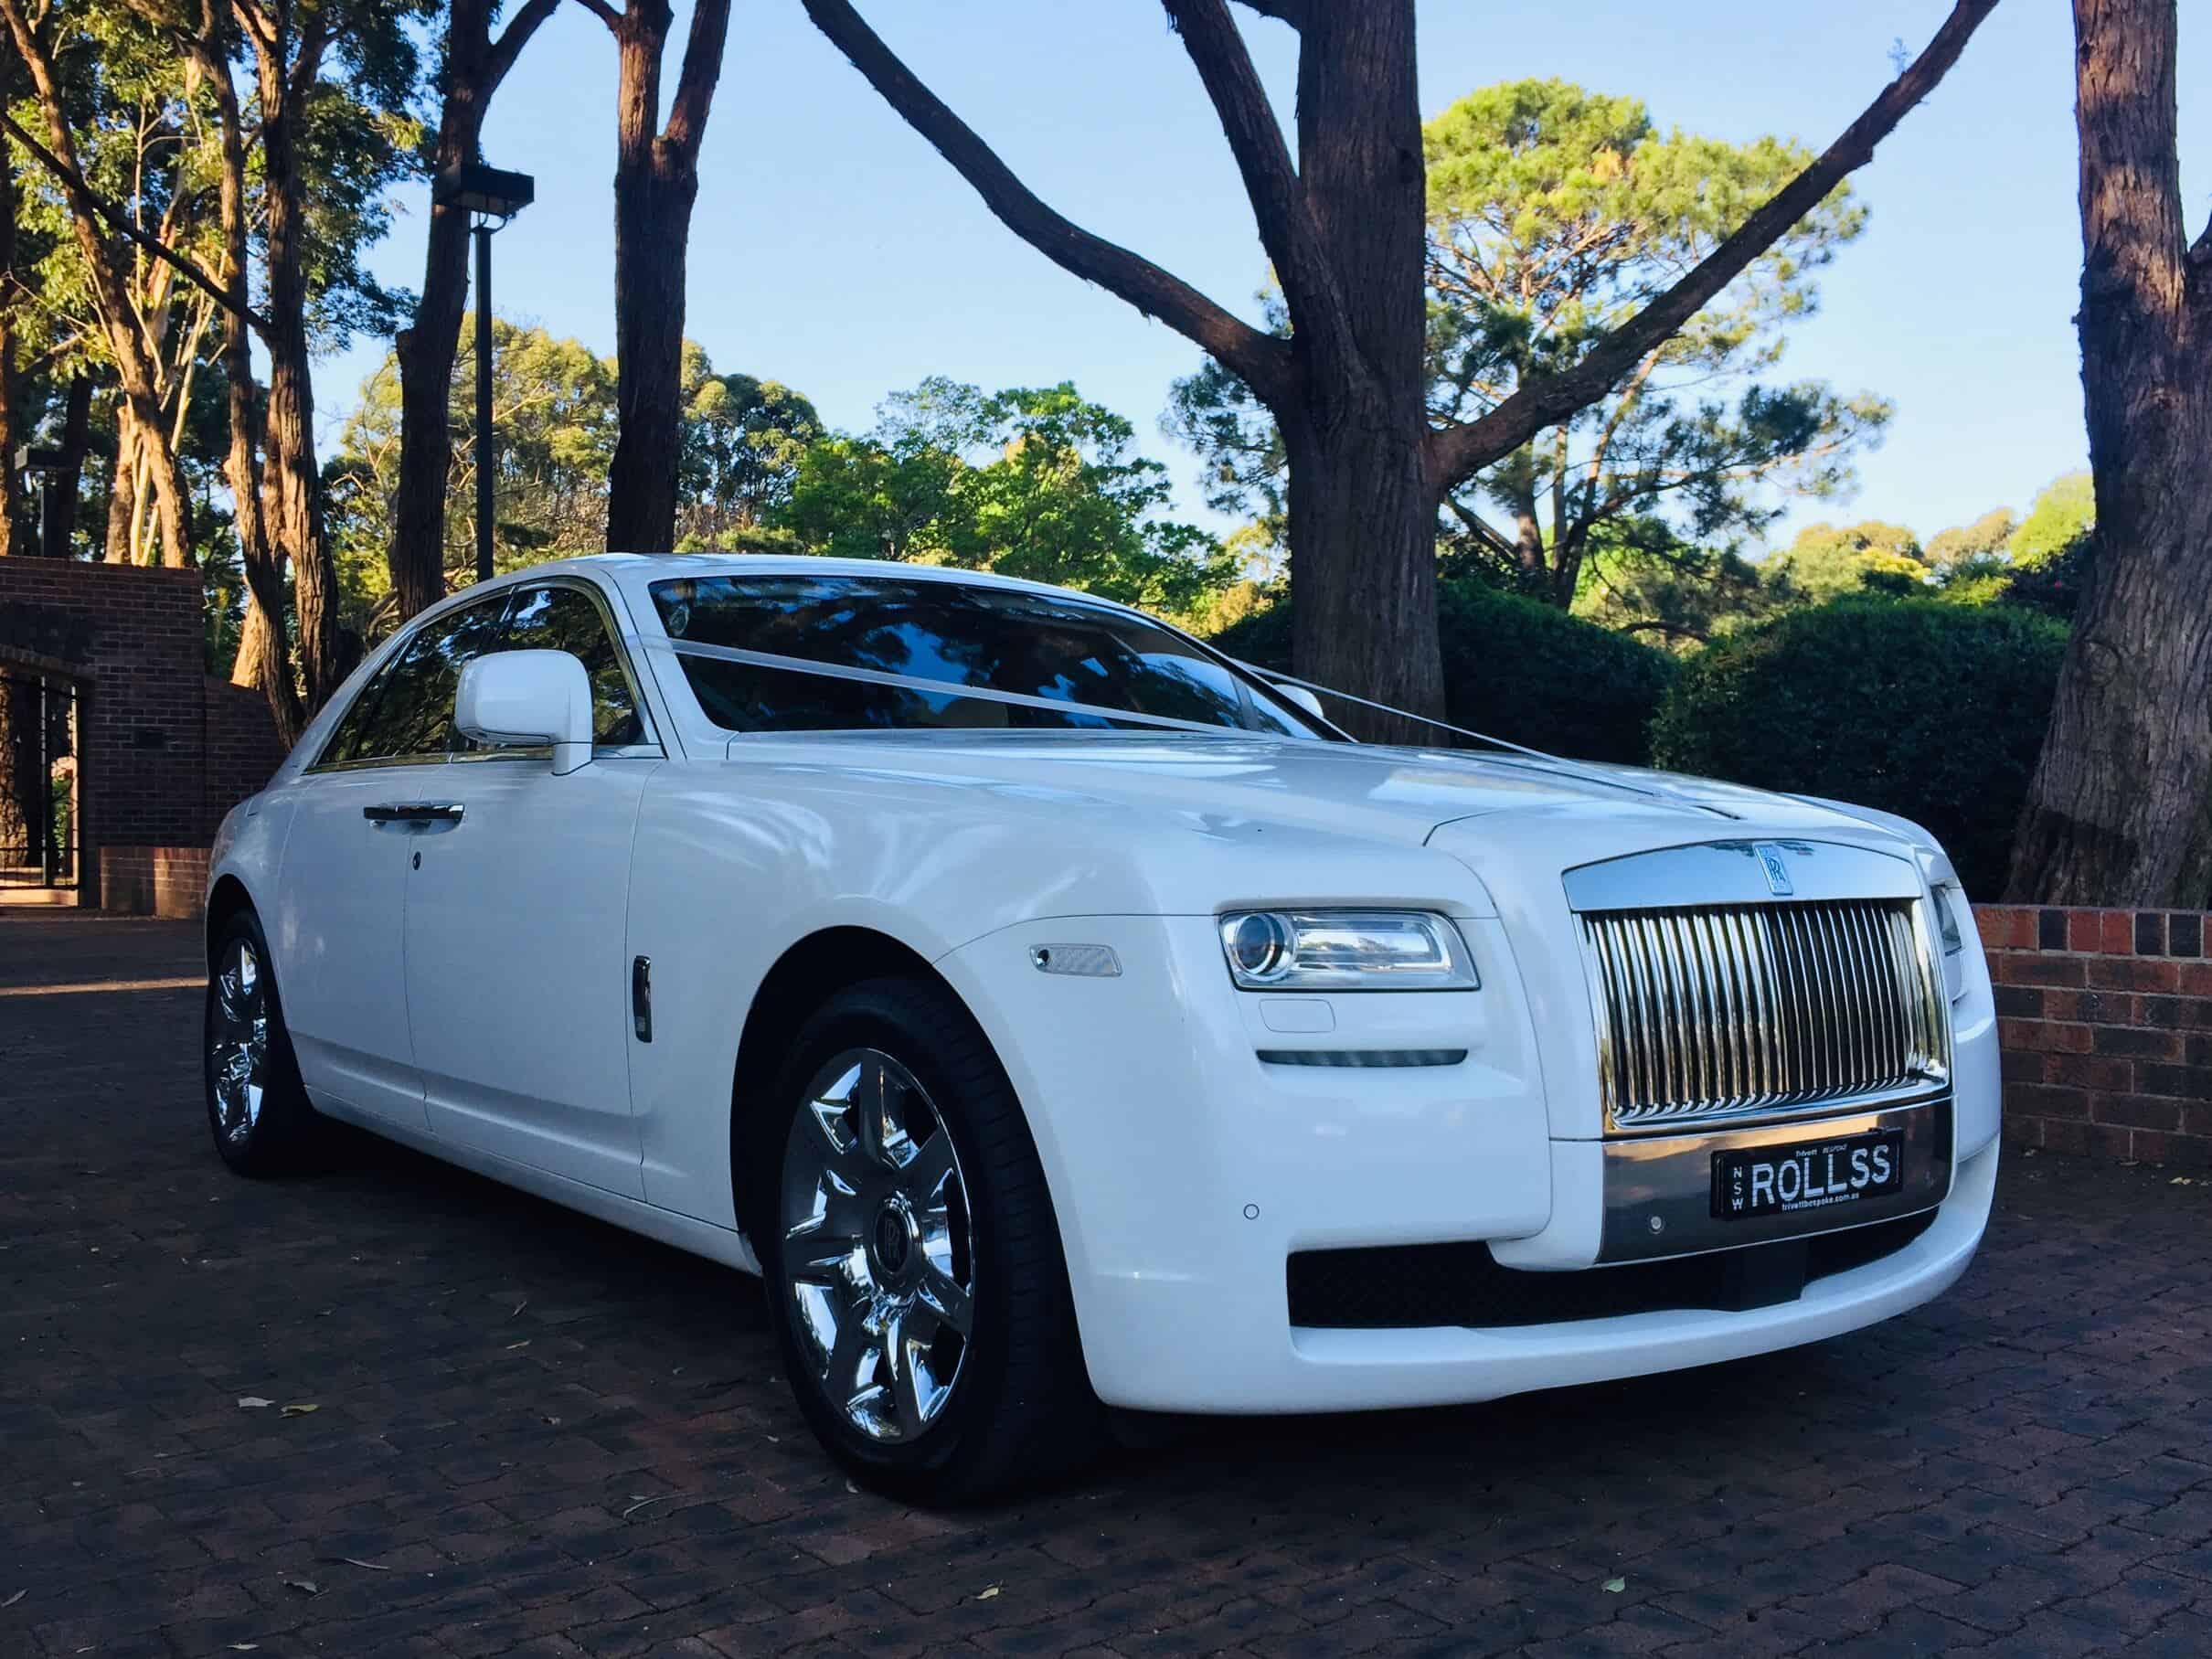 A Rolls-Royce luxury car exuding timeless elegance and sophistication.